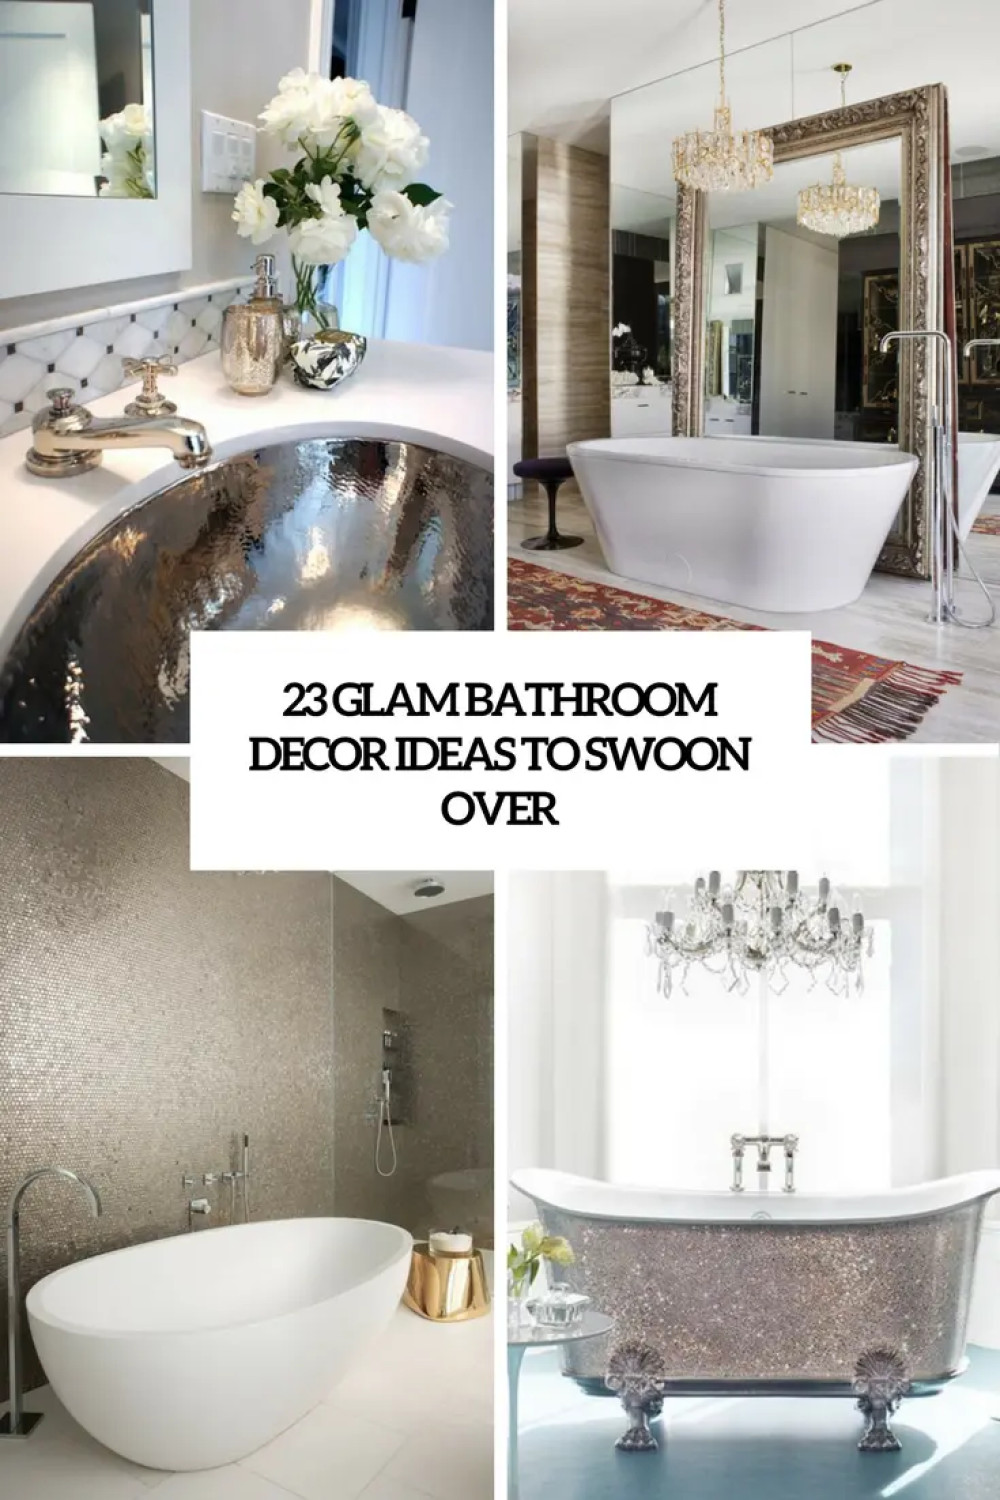 Glam Bathroom Decor Ideas To Swoon Over - DigsDigs